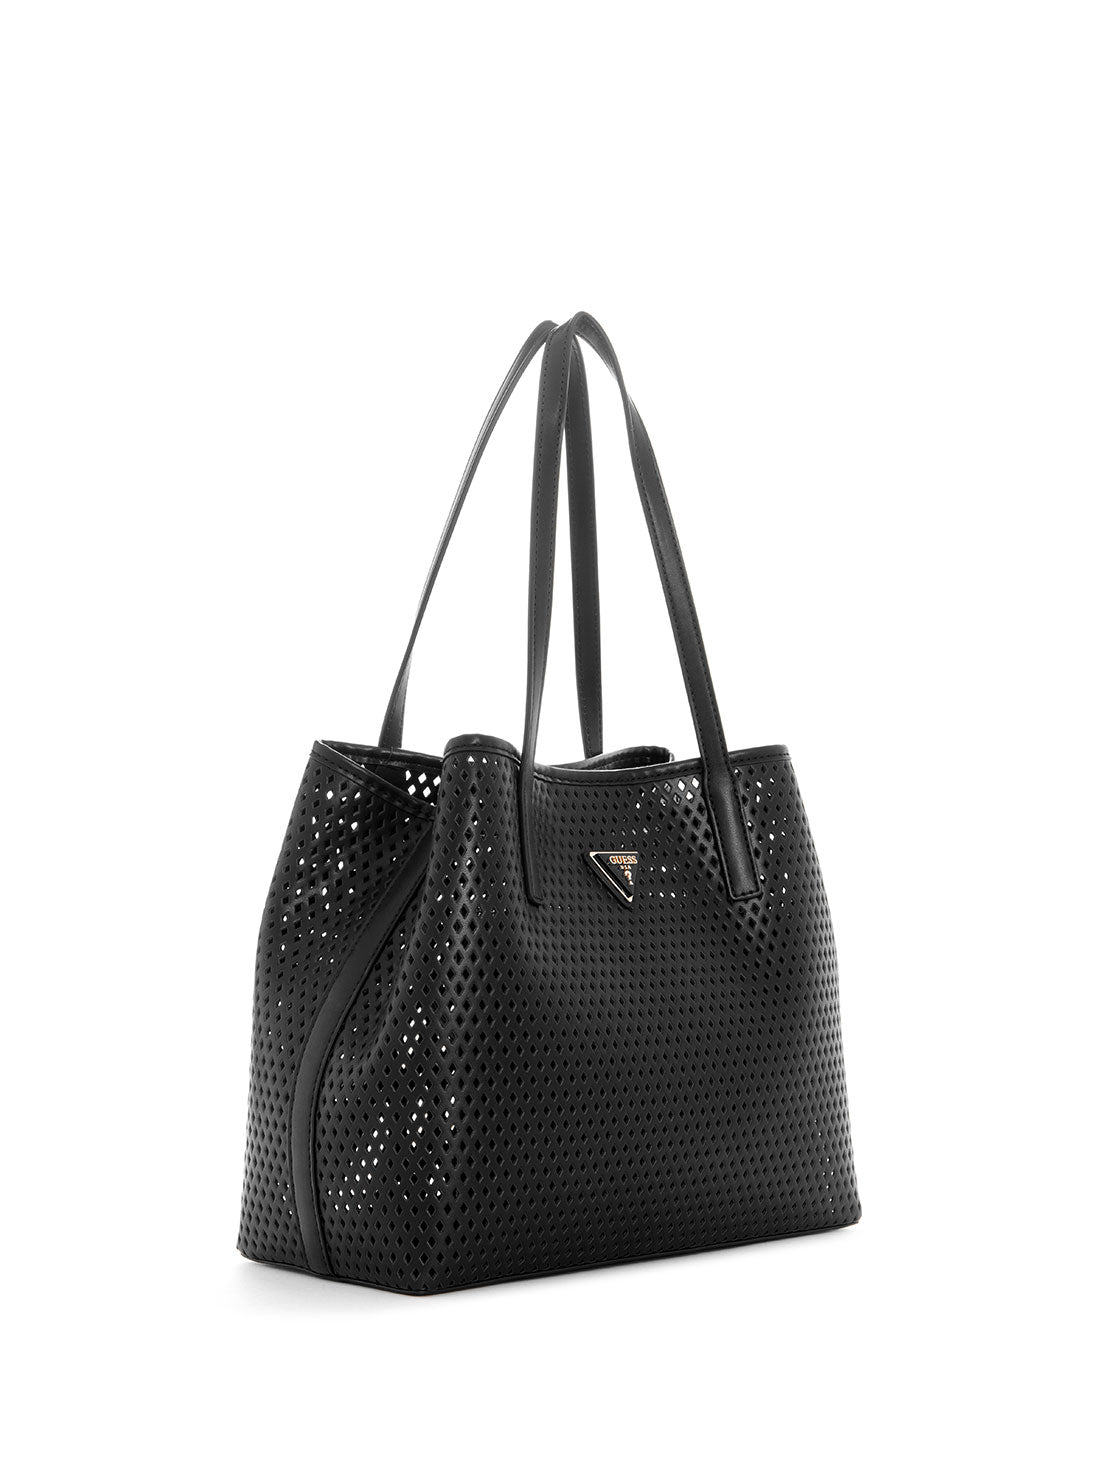 GUESS Women's Black Woven Vikky Tote Bag WP699523 Angle View